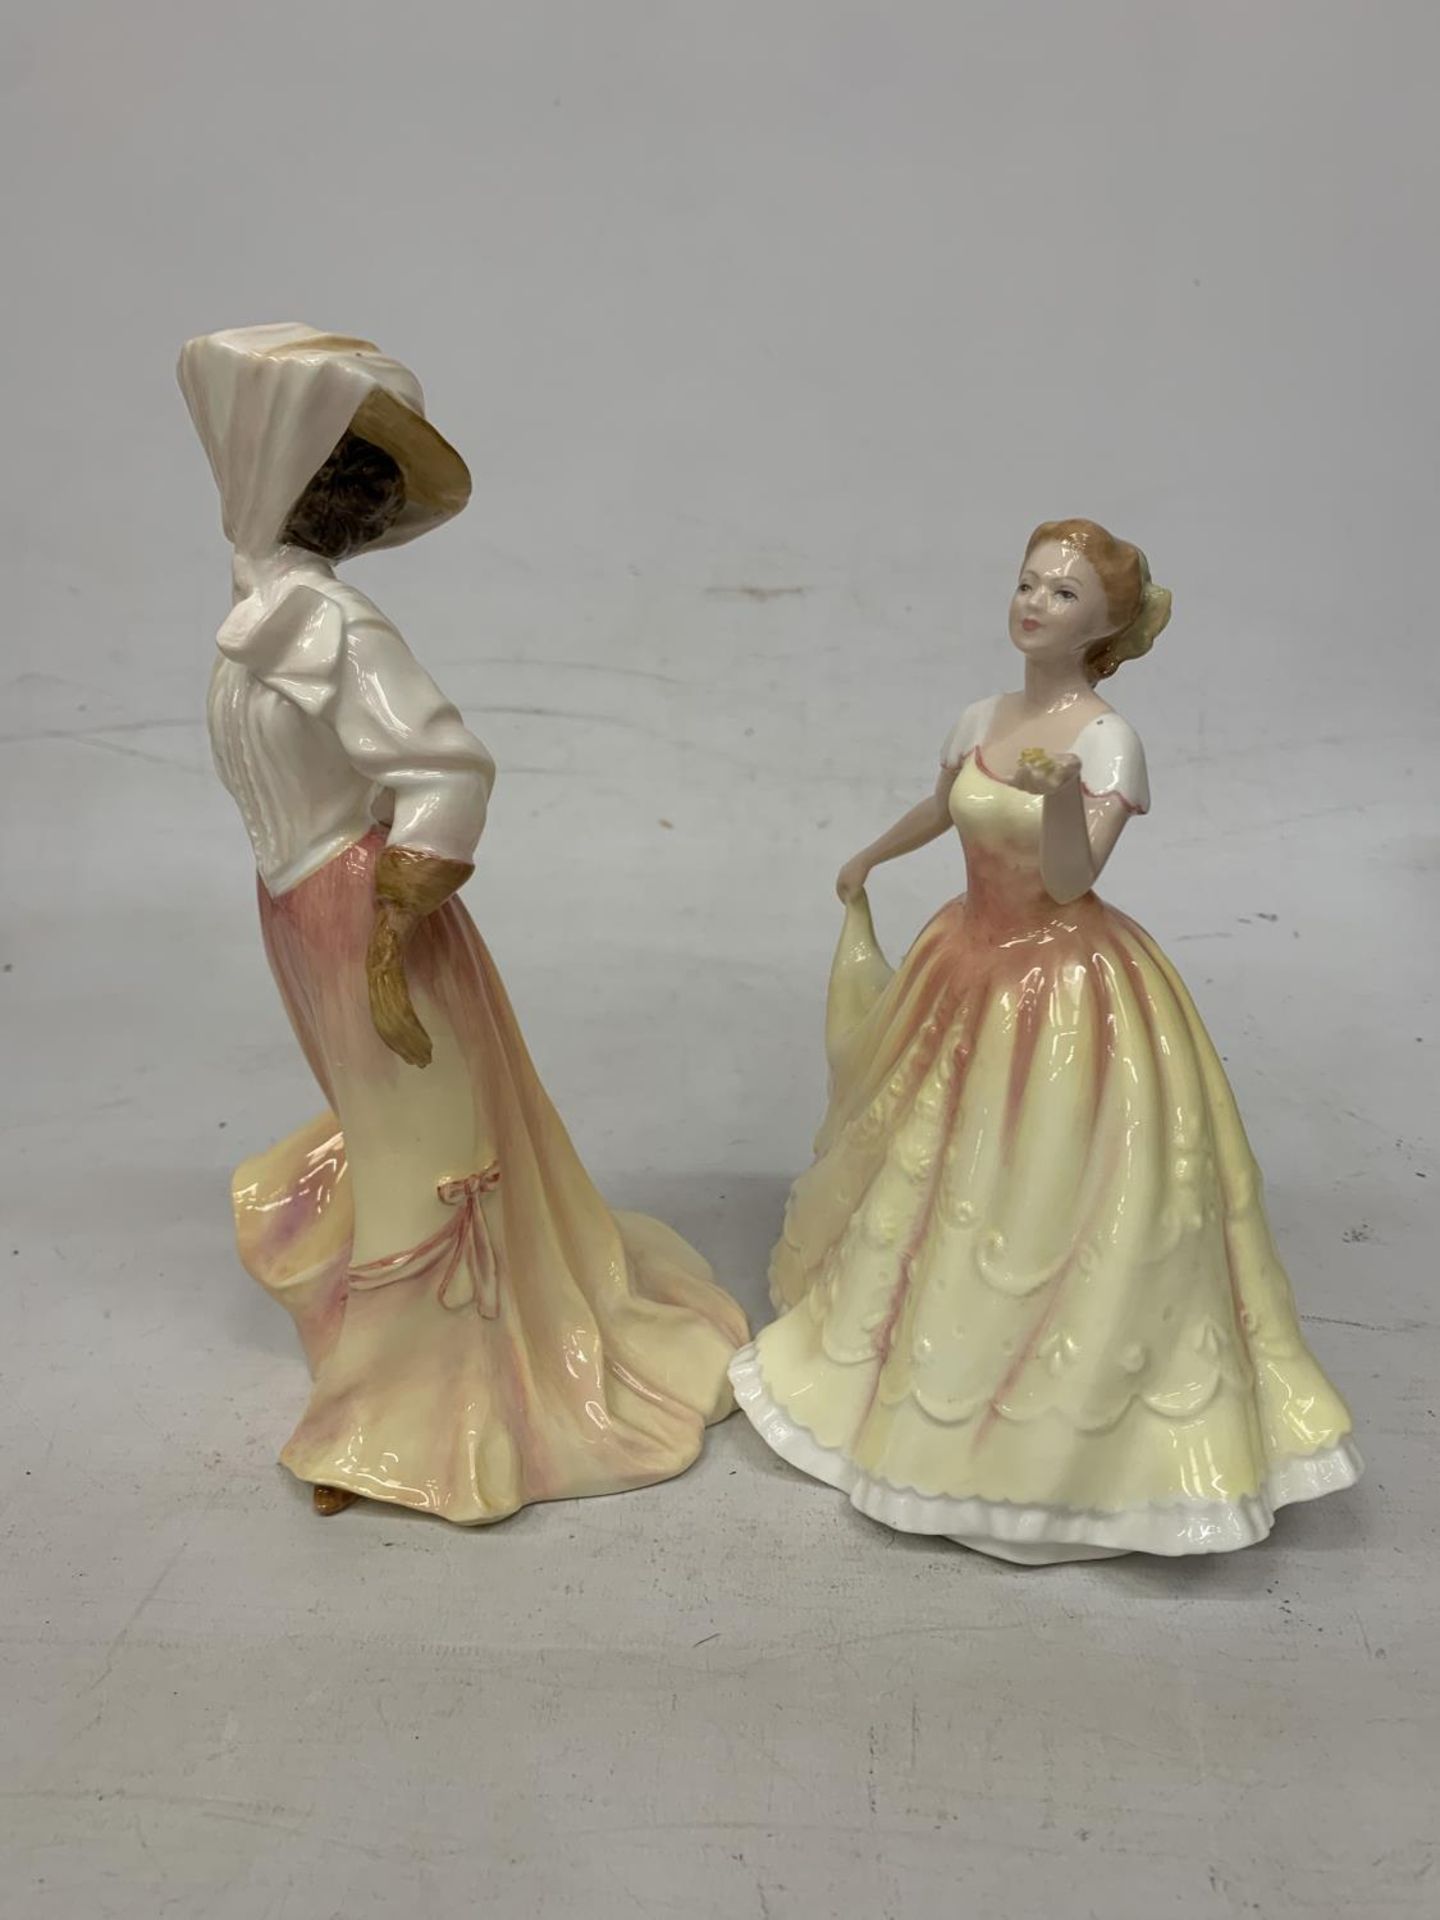 TWO ROYAL DOULTON FIGURES "THE OPEN ROAD" HN 4161 AND FIGURE OF THE YEAR " DEBORAH" HN 3644 - Image 3 of 4